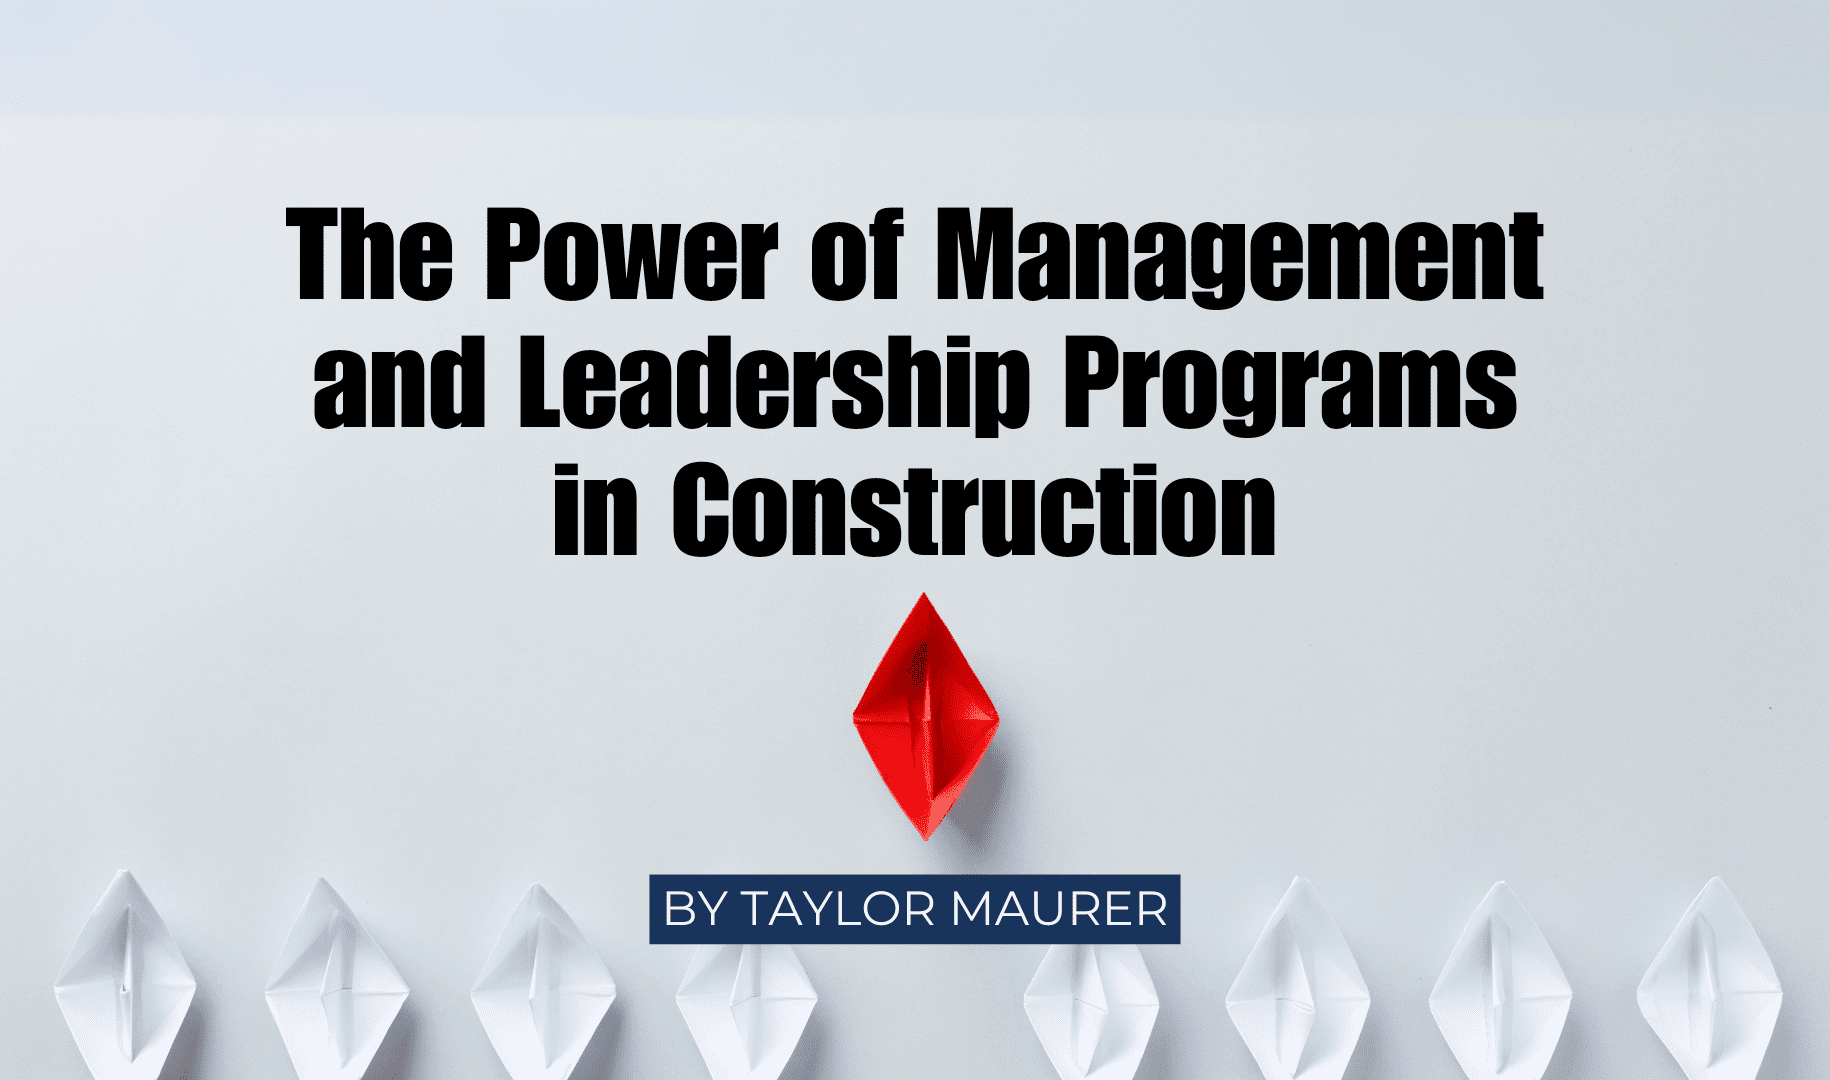 The Power of Management and Leadership Programs in Construction